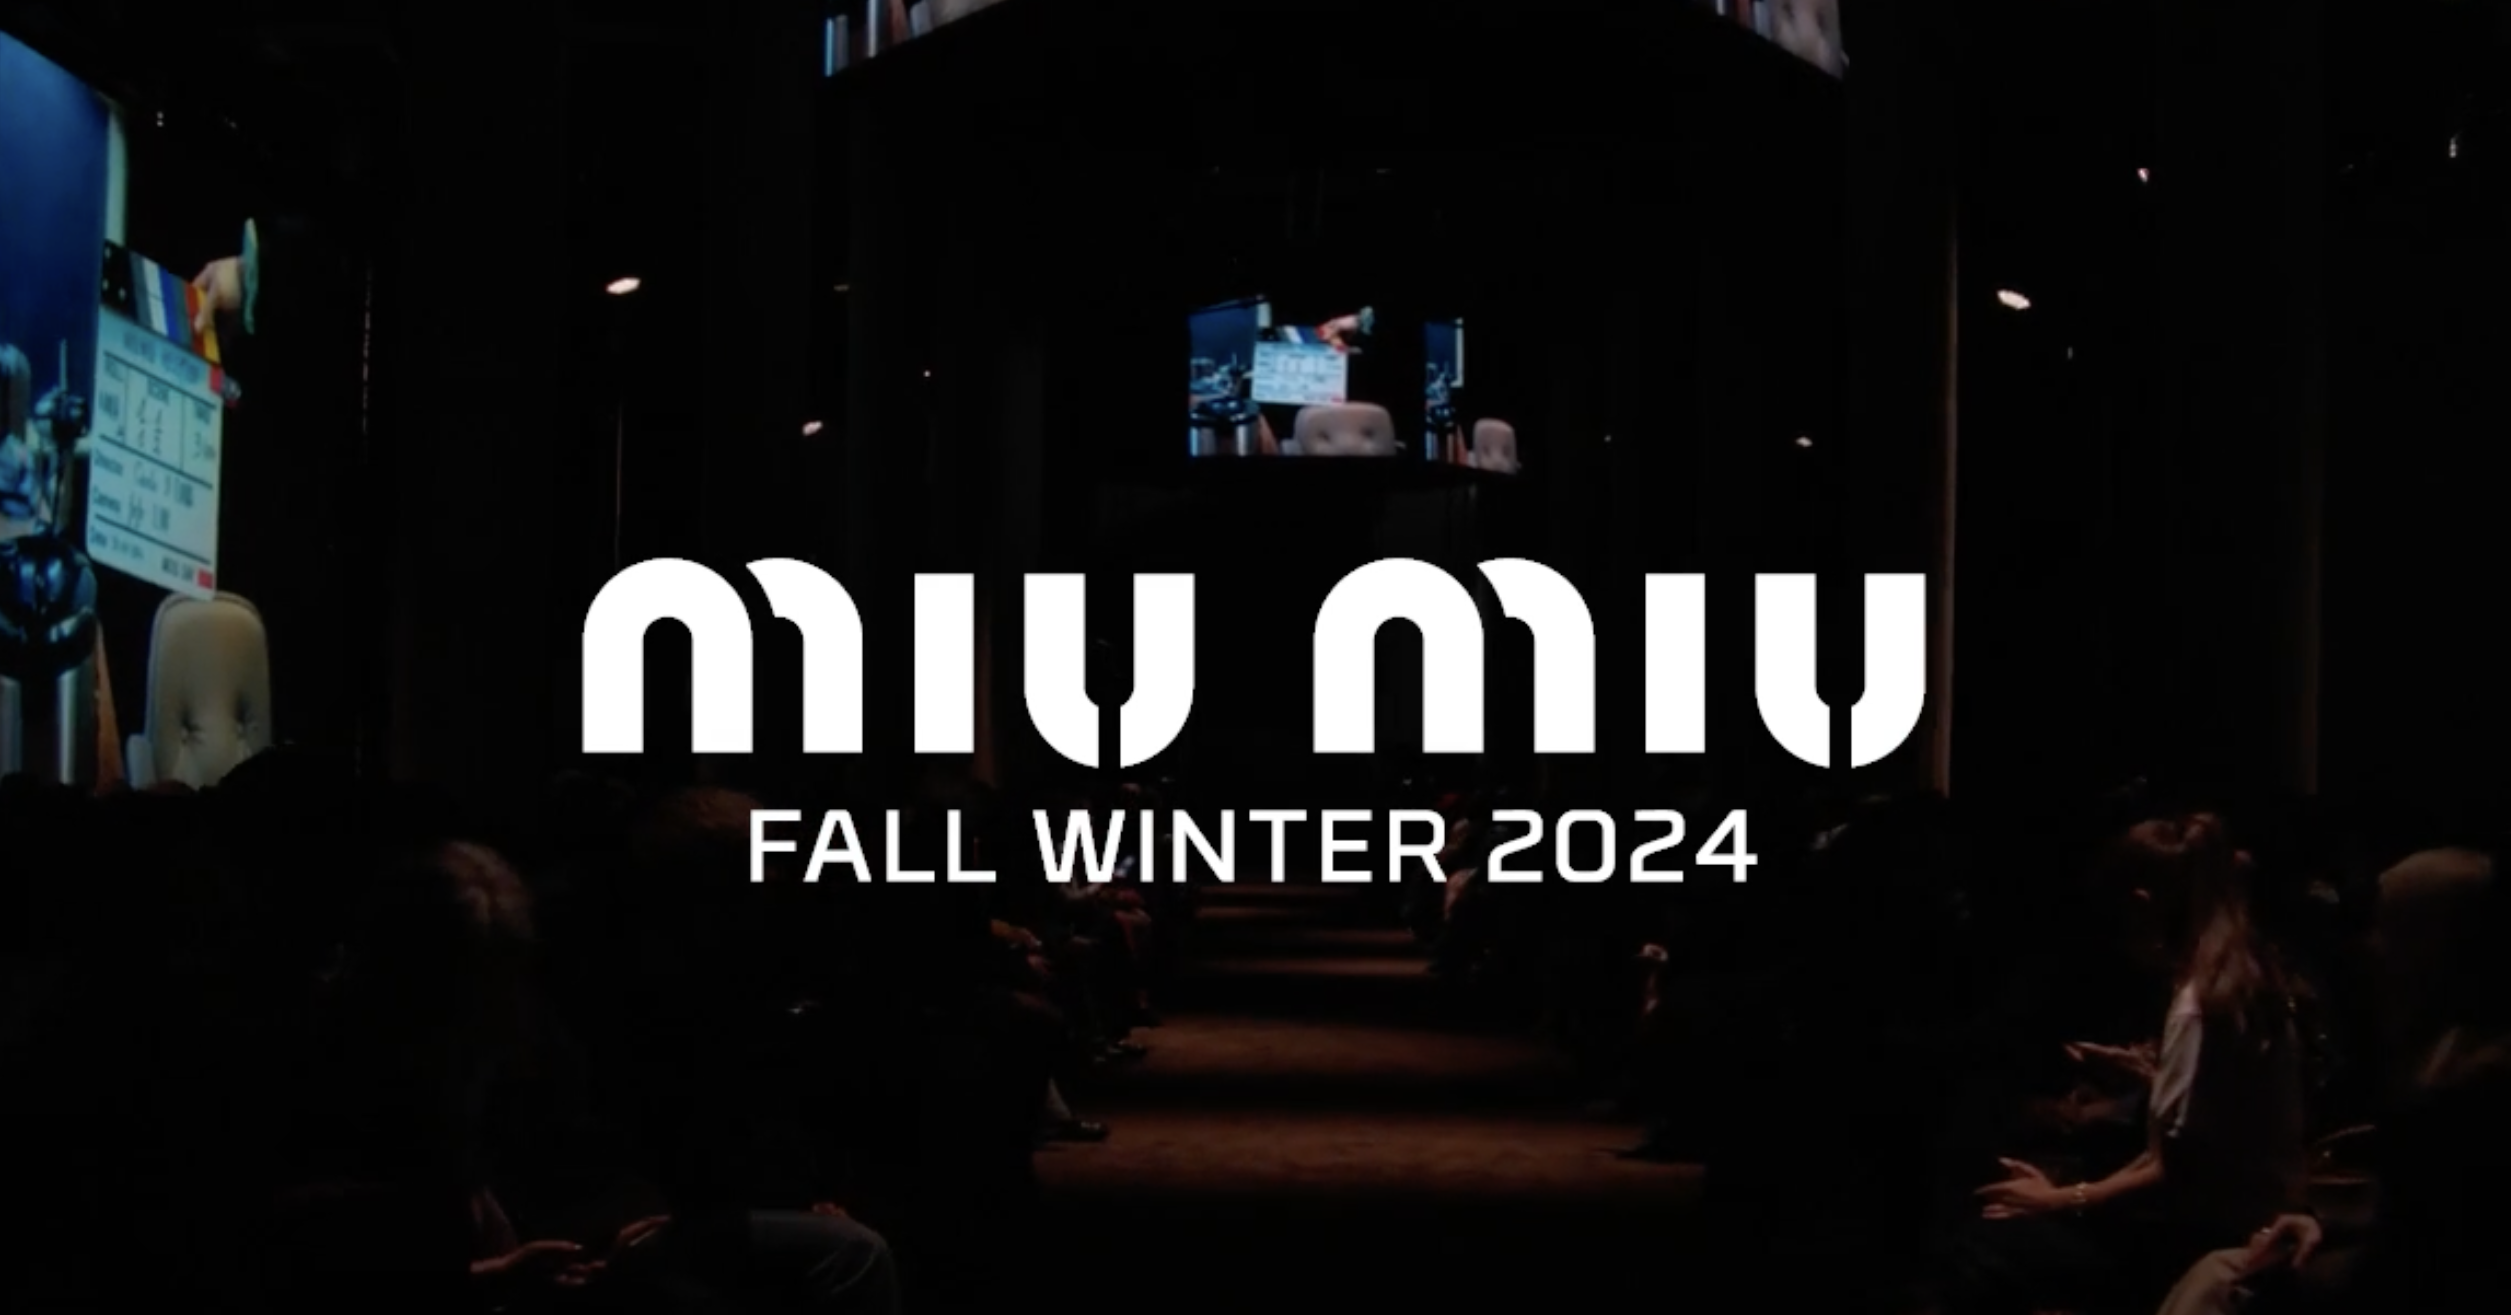 Promotional image for Miu Miu Fall/Winter 2024 fashion show, with the Miu Miu logo in white overlaying a dimly lit audience in a runway hall, hinting at the start of the event at Palais d'Iéna.